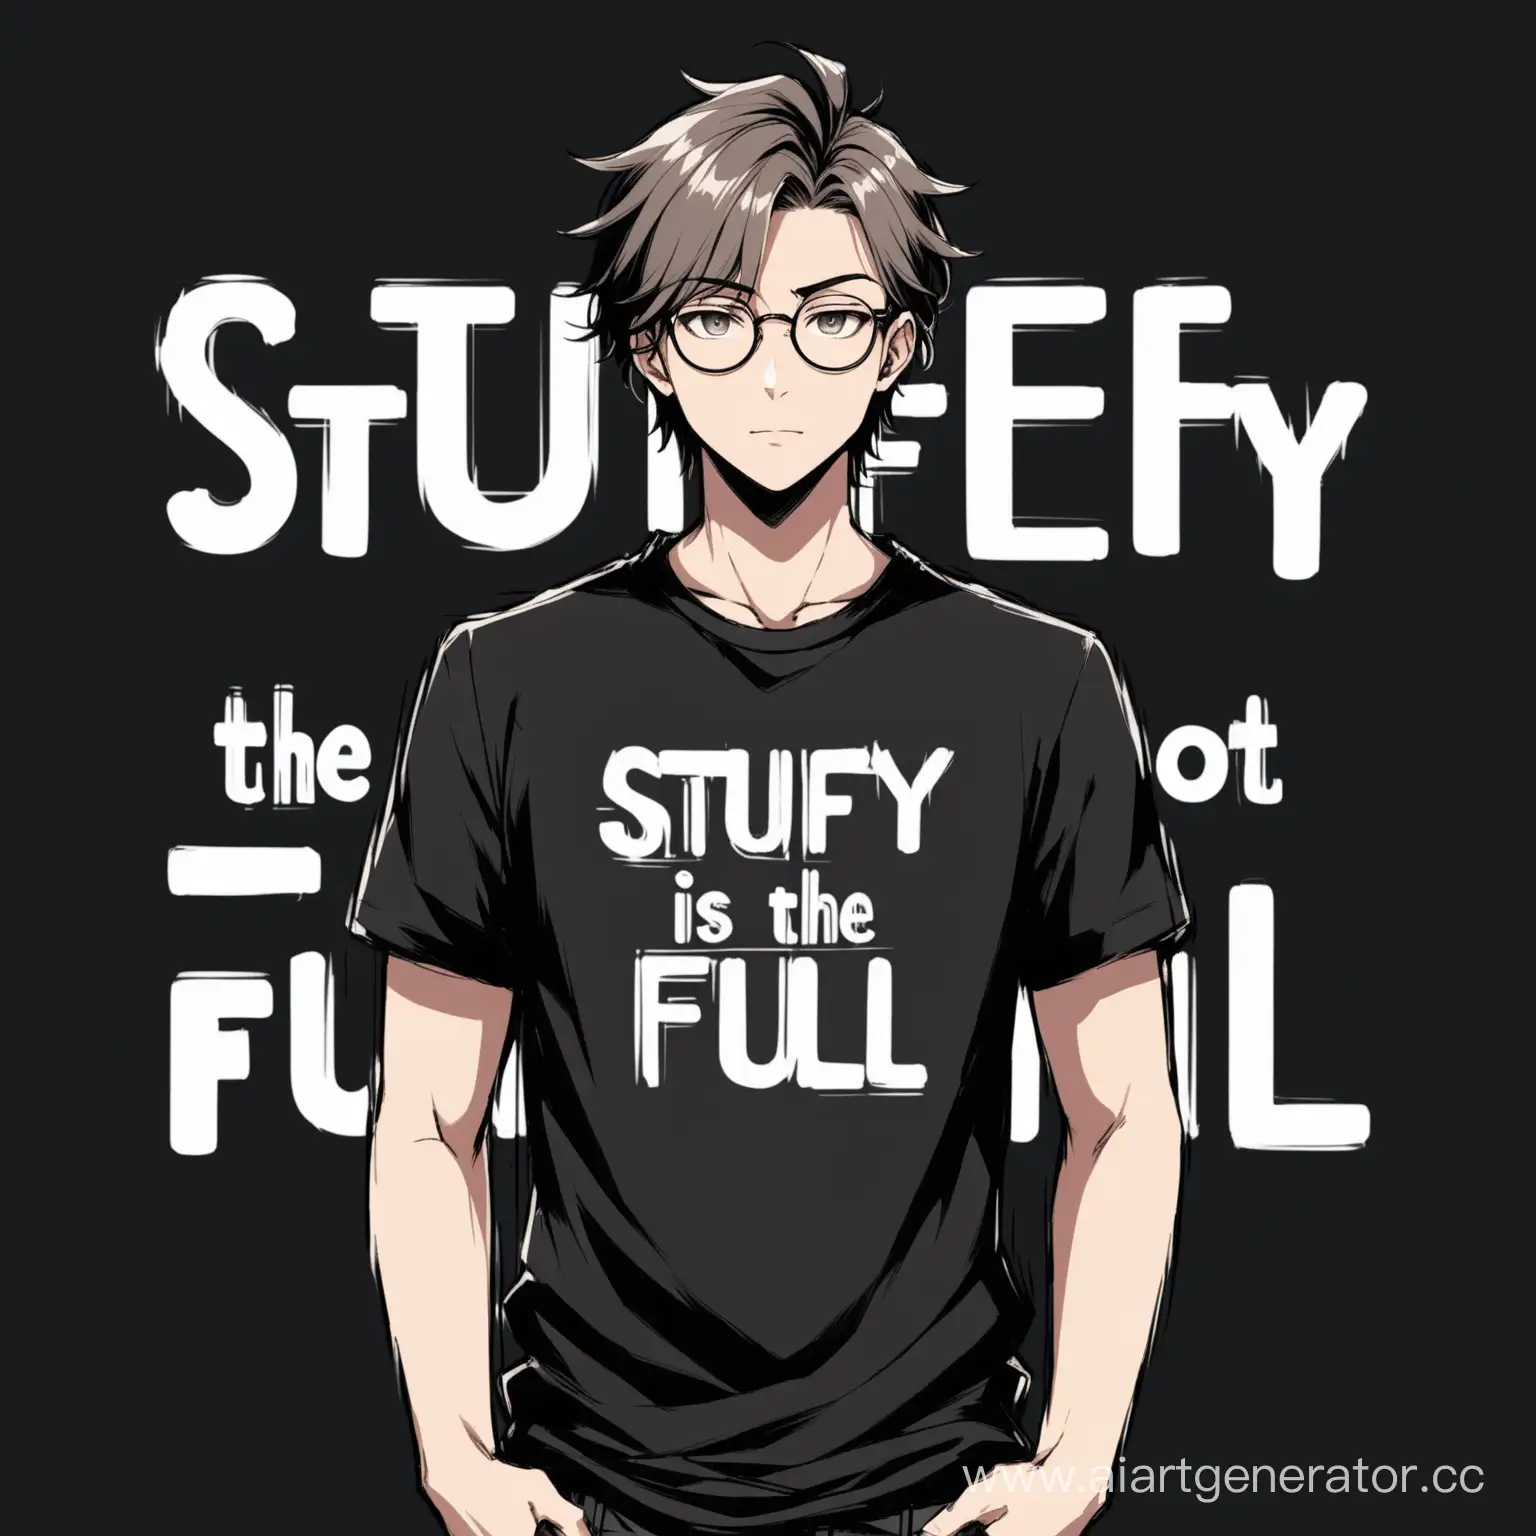 Anime-Style-Portrait-of-a-23YearOld-Guy-with-Ashen-Hair-and-Glasses-on-Black-Background